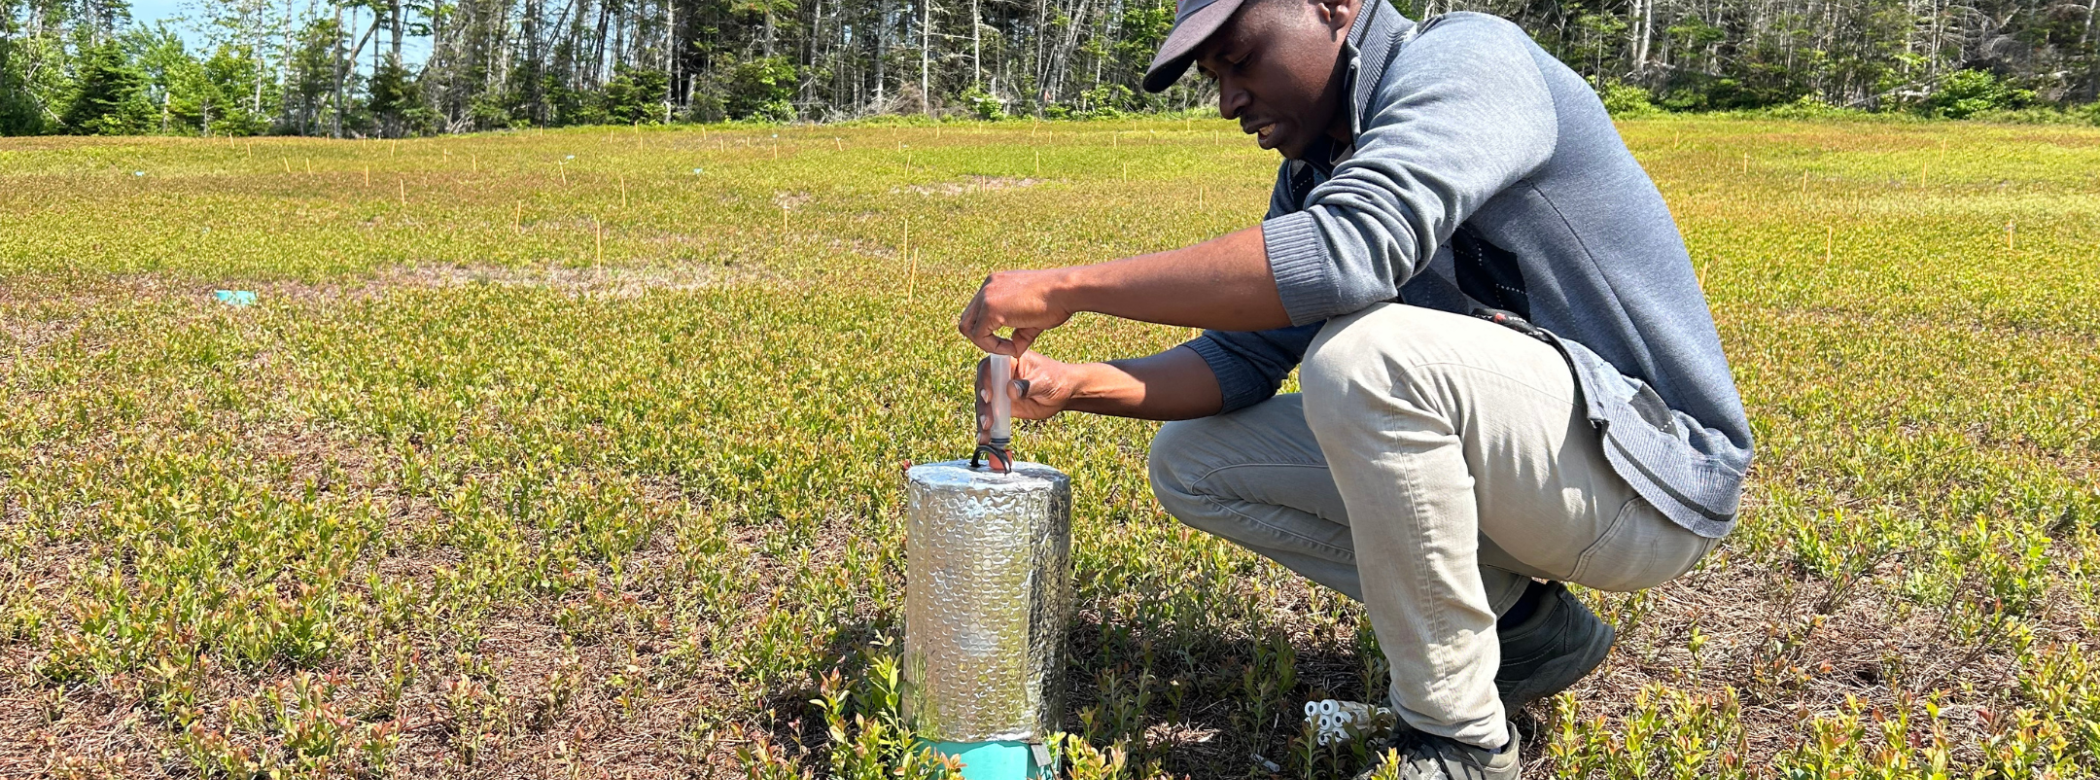 ECT-NS researcher demonstrates tech for wild blueberries field